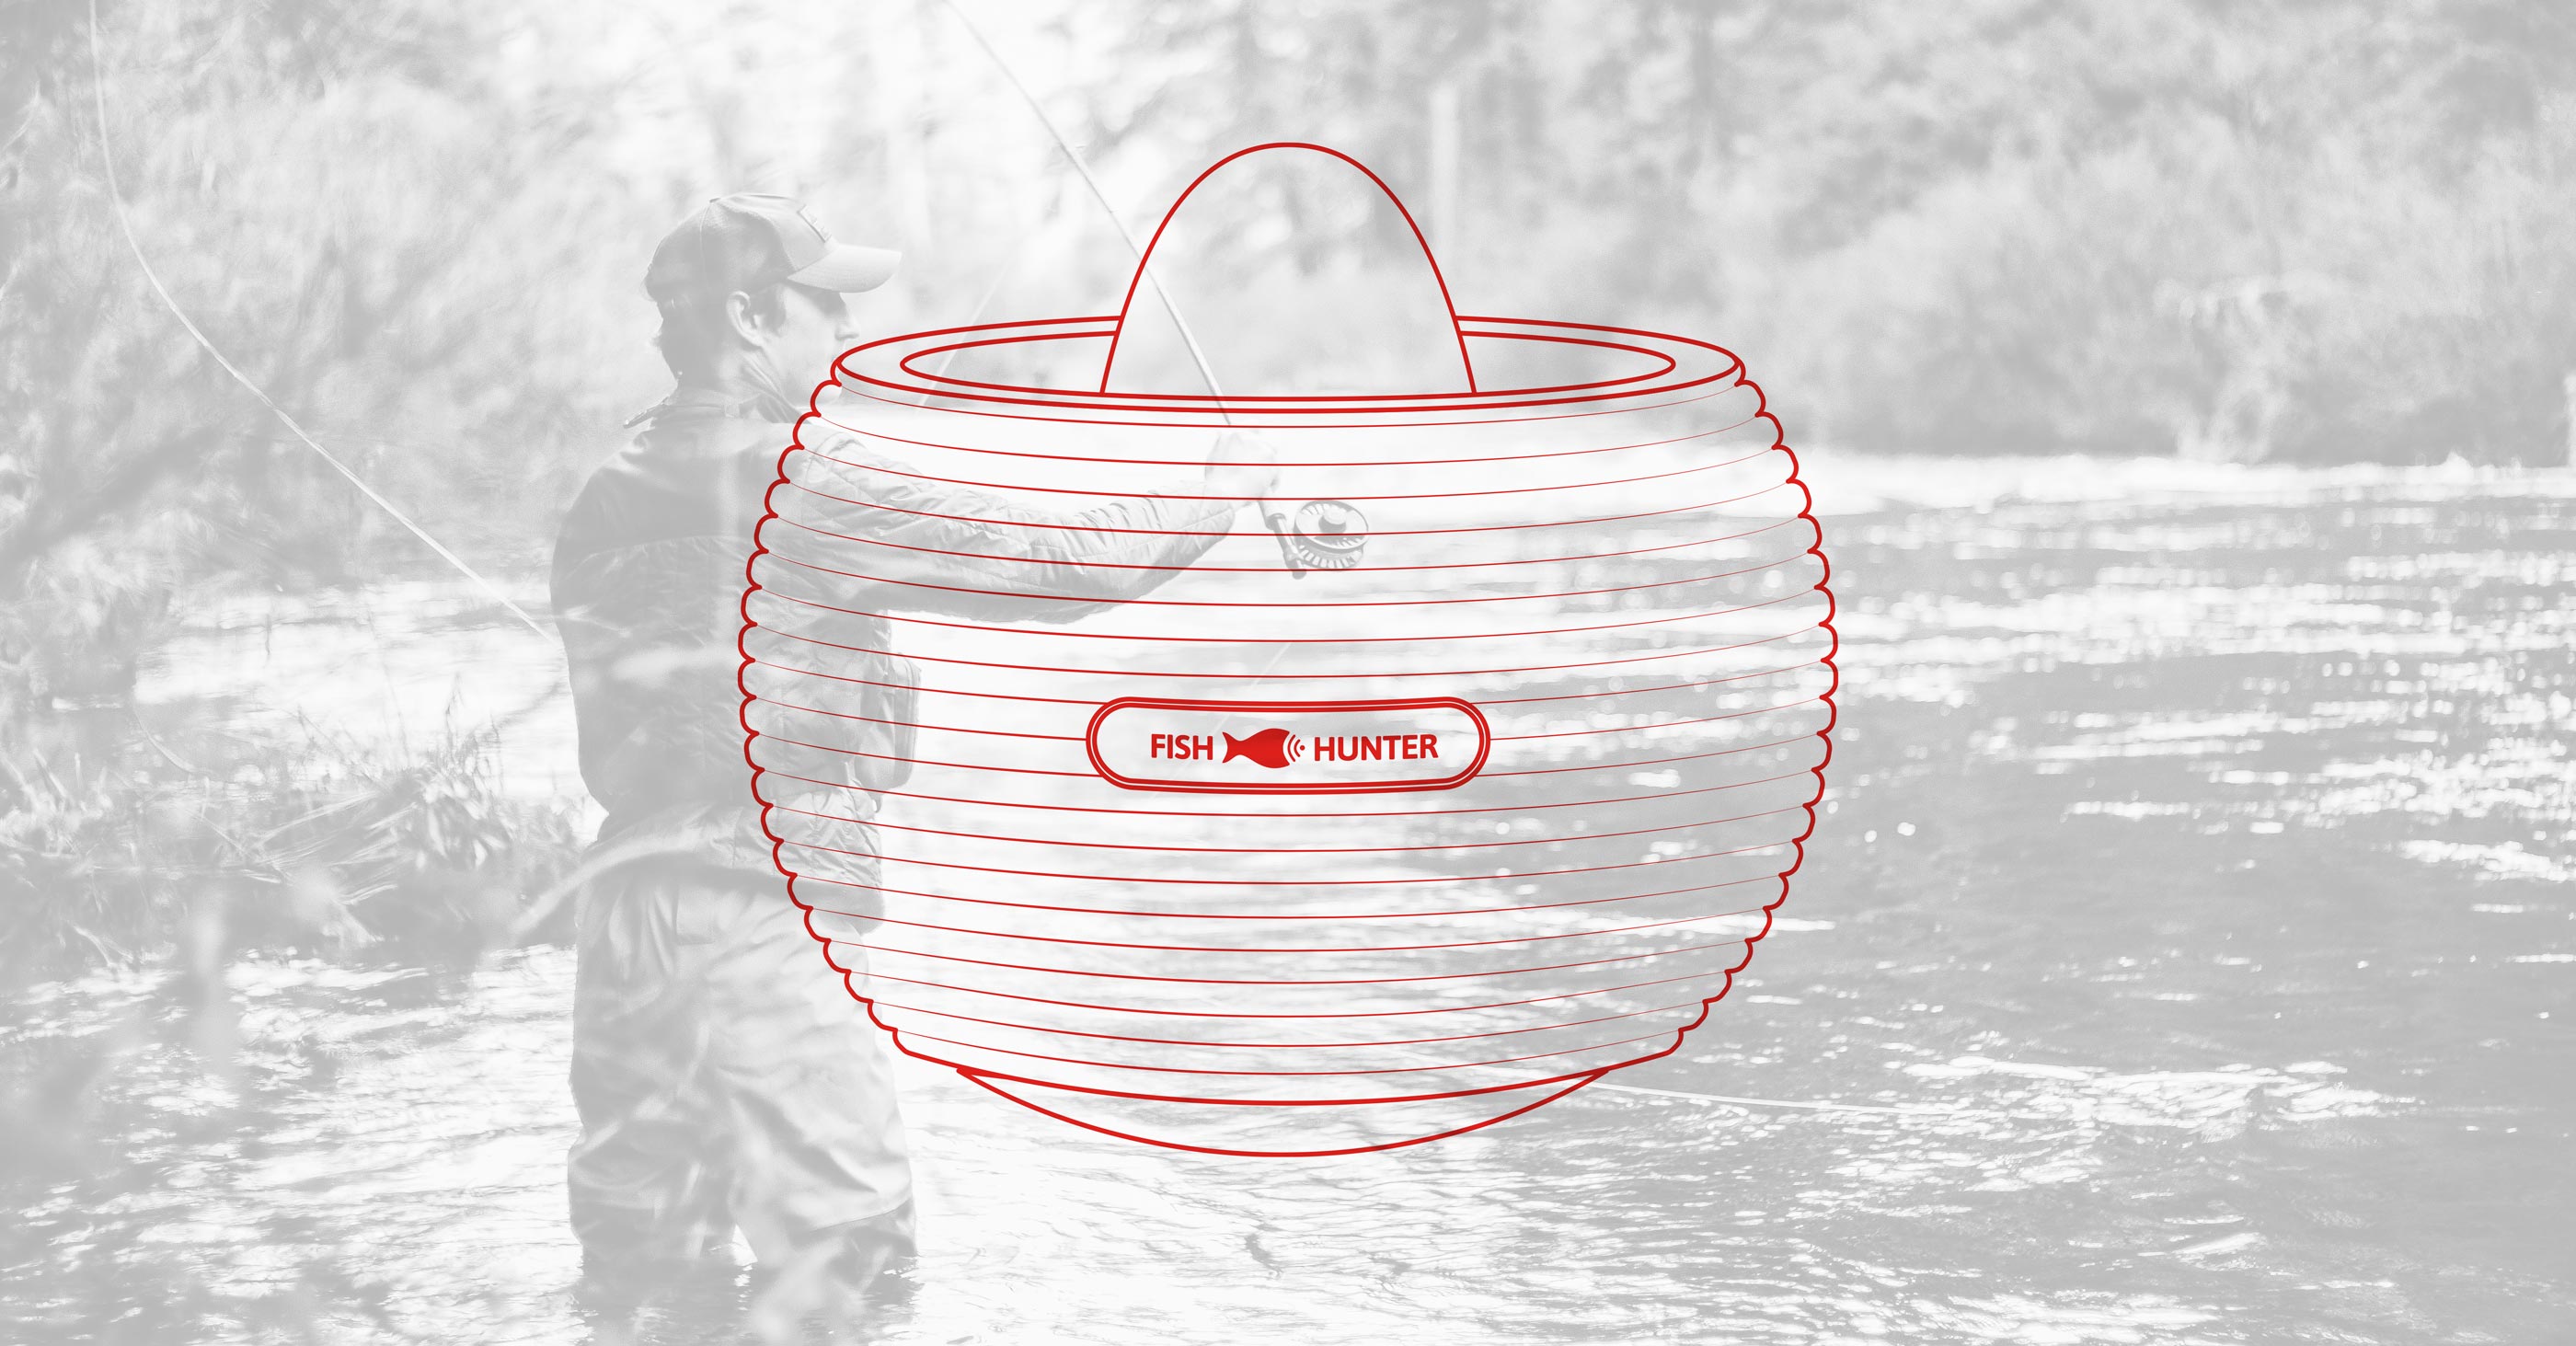 Showing a Fish Hunter Line Illustration Design in Red Superimposed Over Black and White Fisherman Image by Karbon Branding